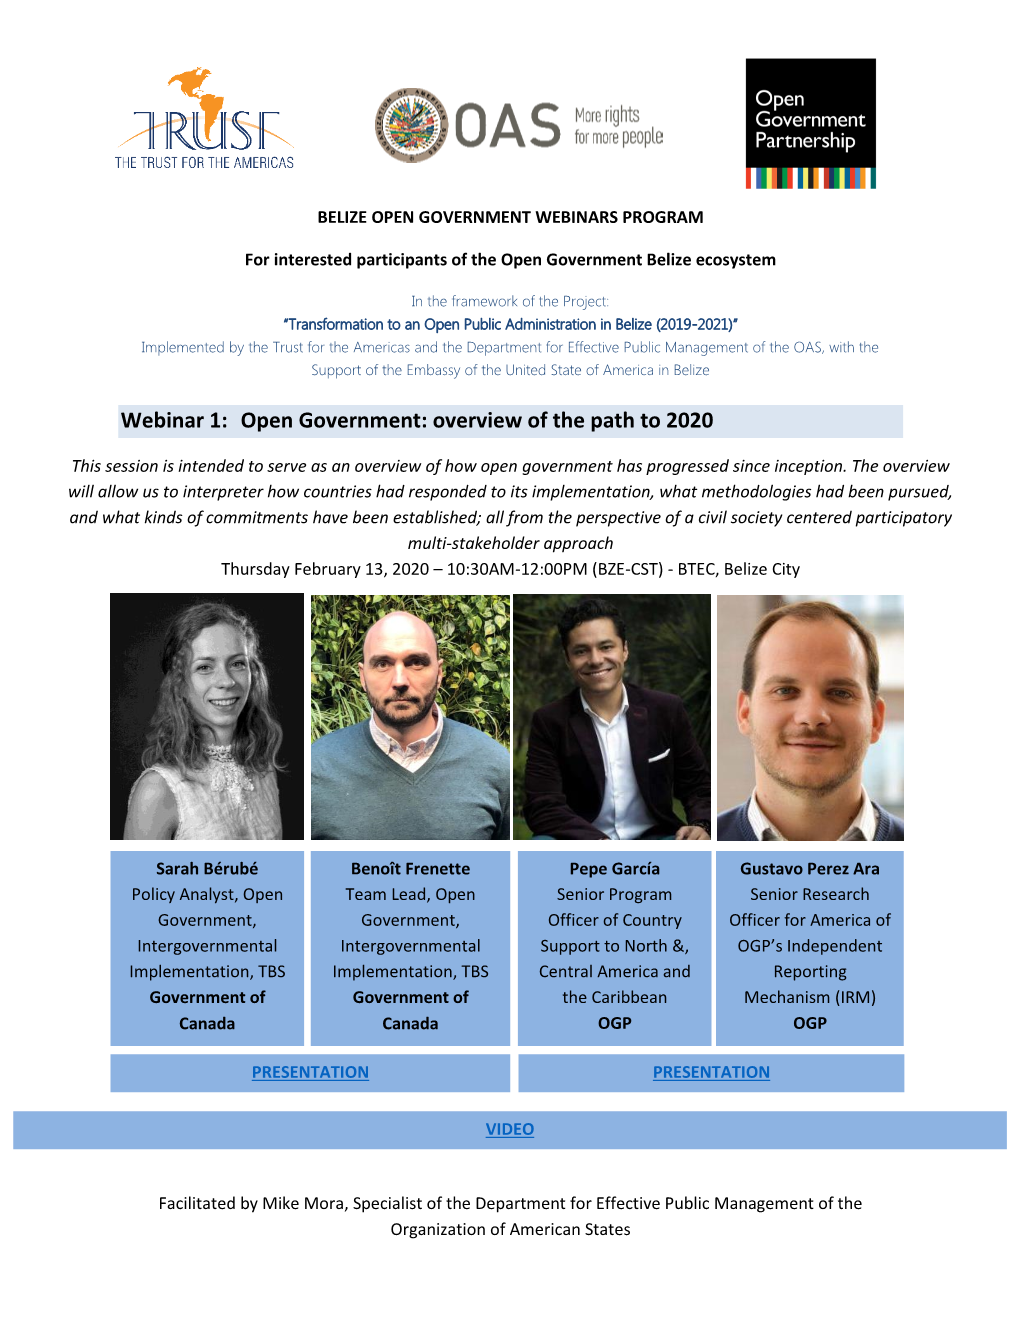 Webinar 1: Open Government: Overview of the Path to 2020